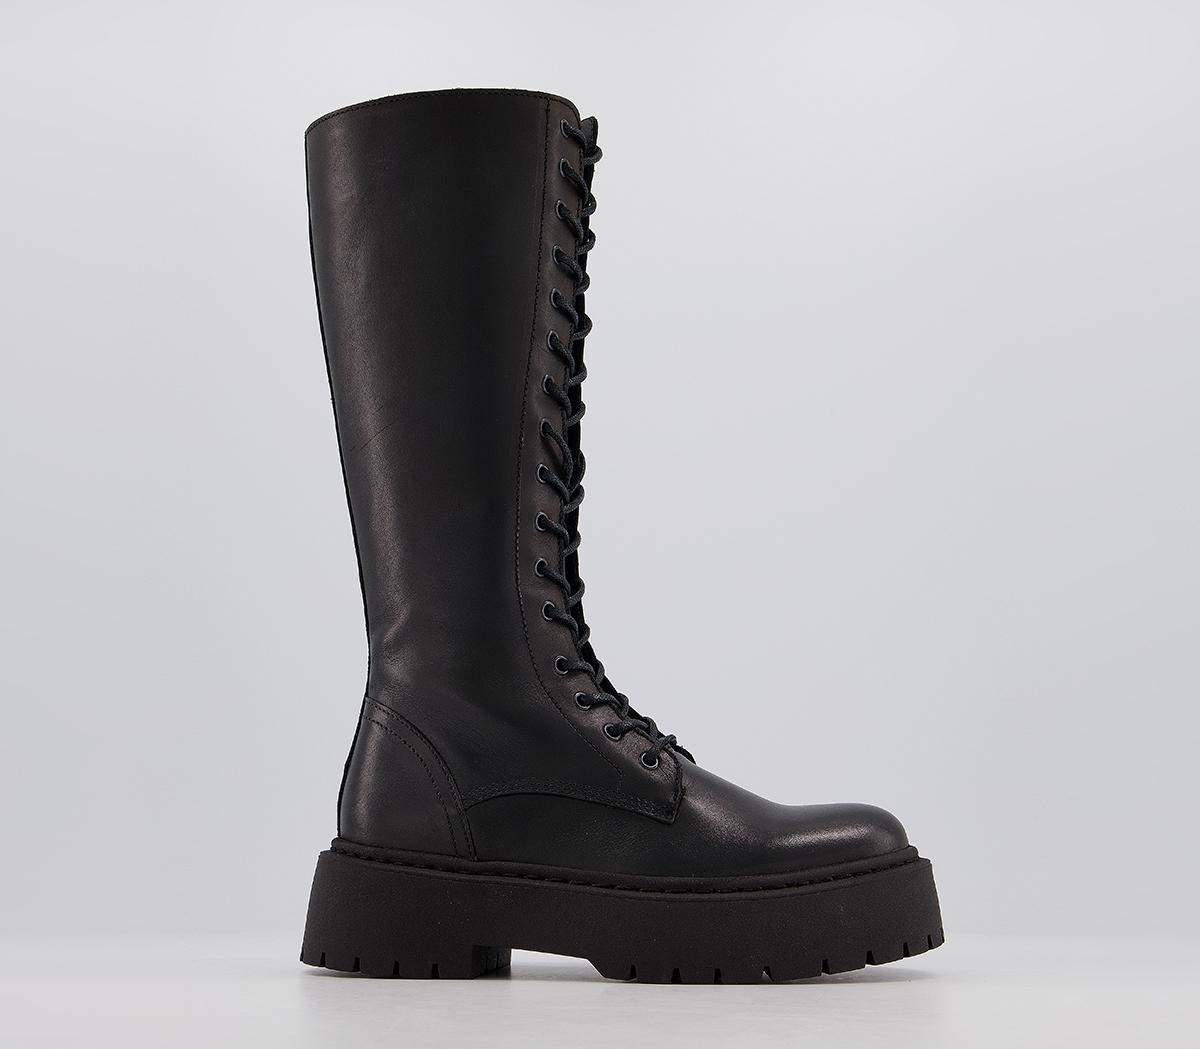 OFFICEKnowing Chunky Calf BootsBlack Leather